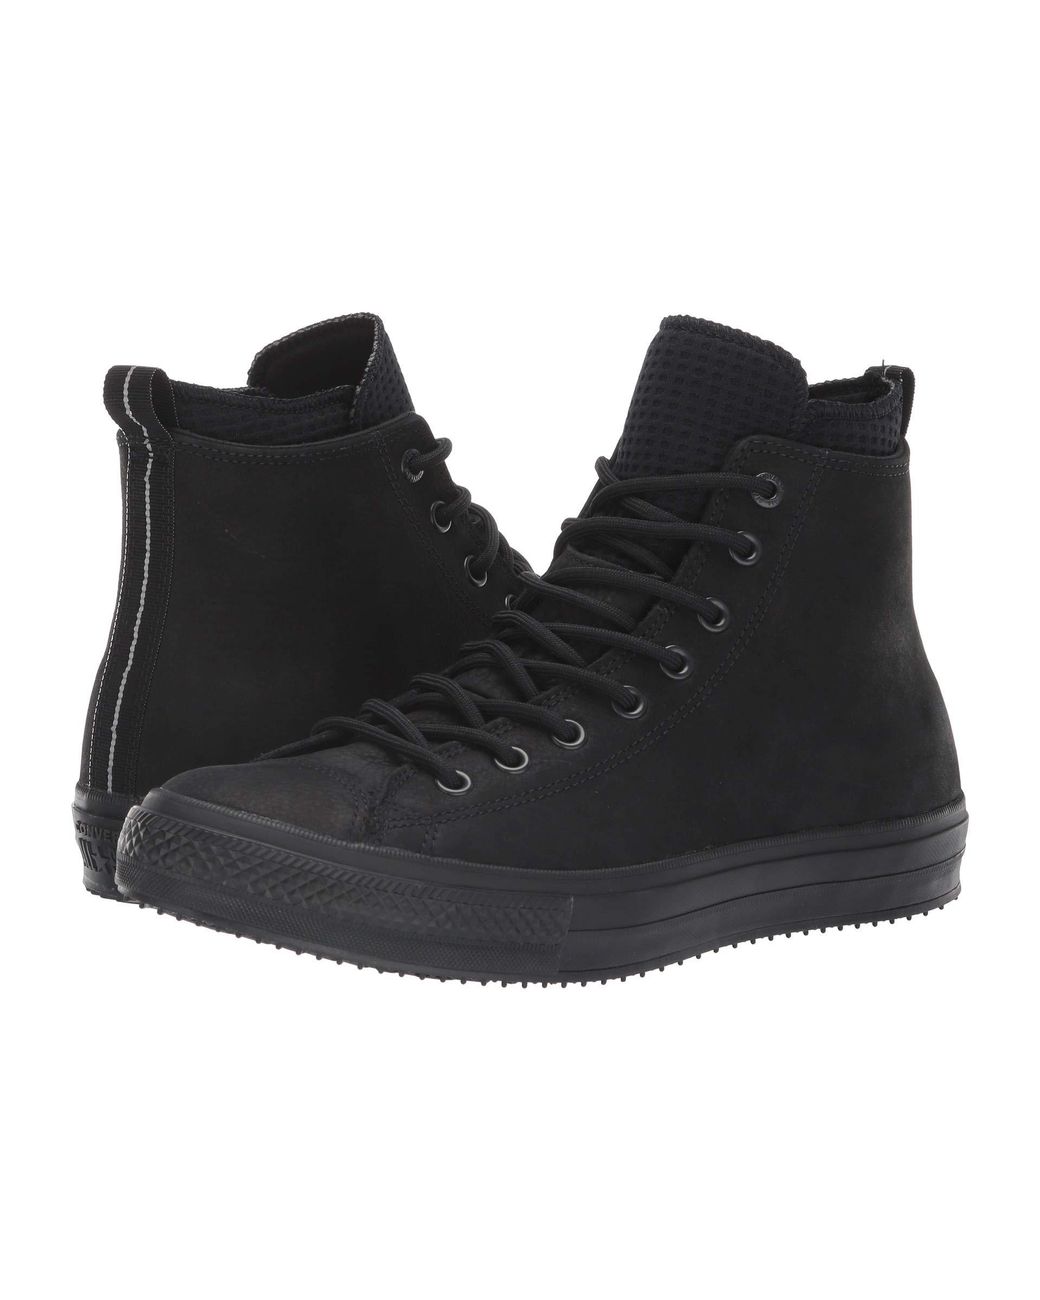 Converse Chuck Taylor All Star Utility Draft Boot - Hi (black/black/black)  Lace Up Casual Shoes for Men | Lyst